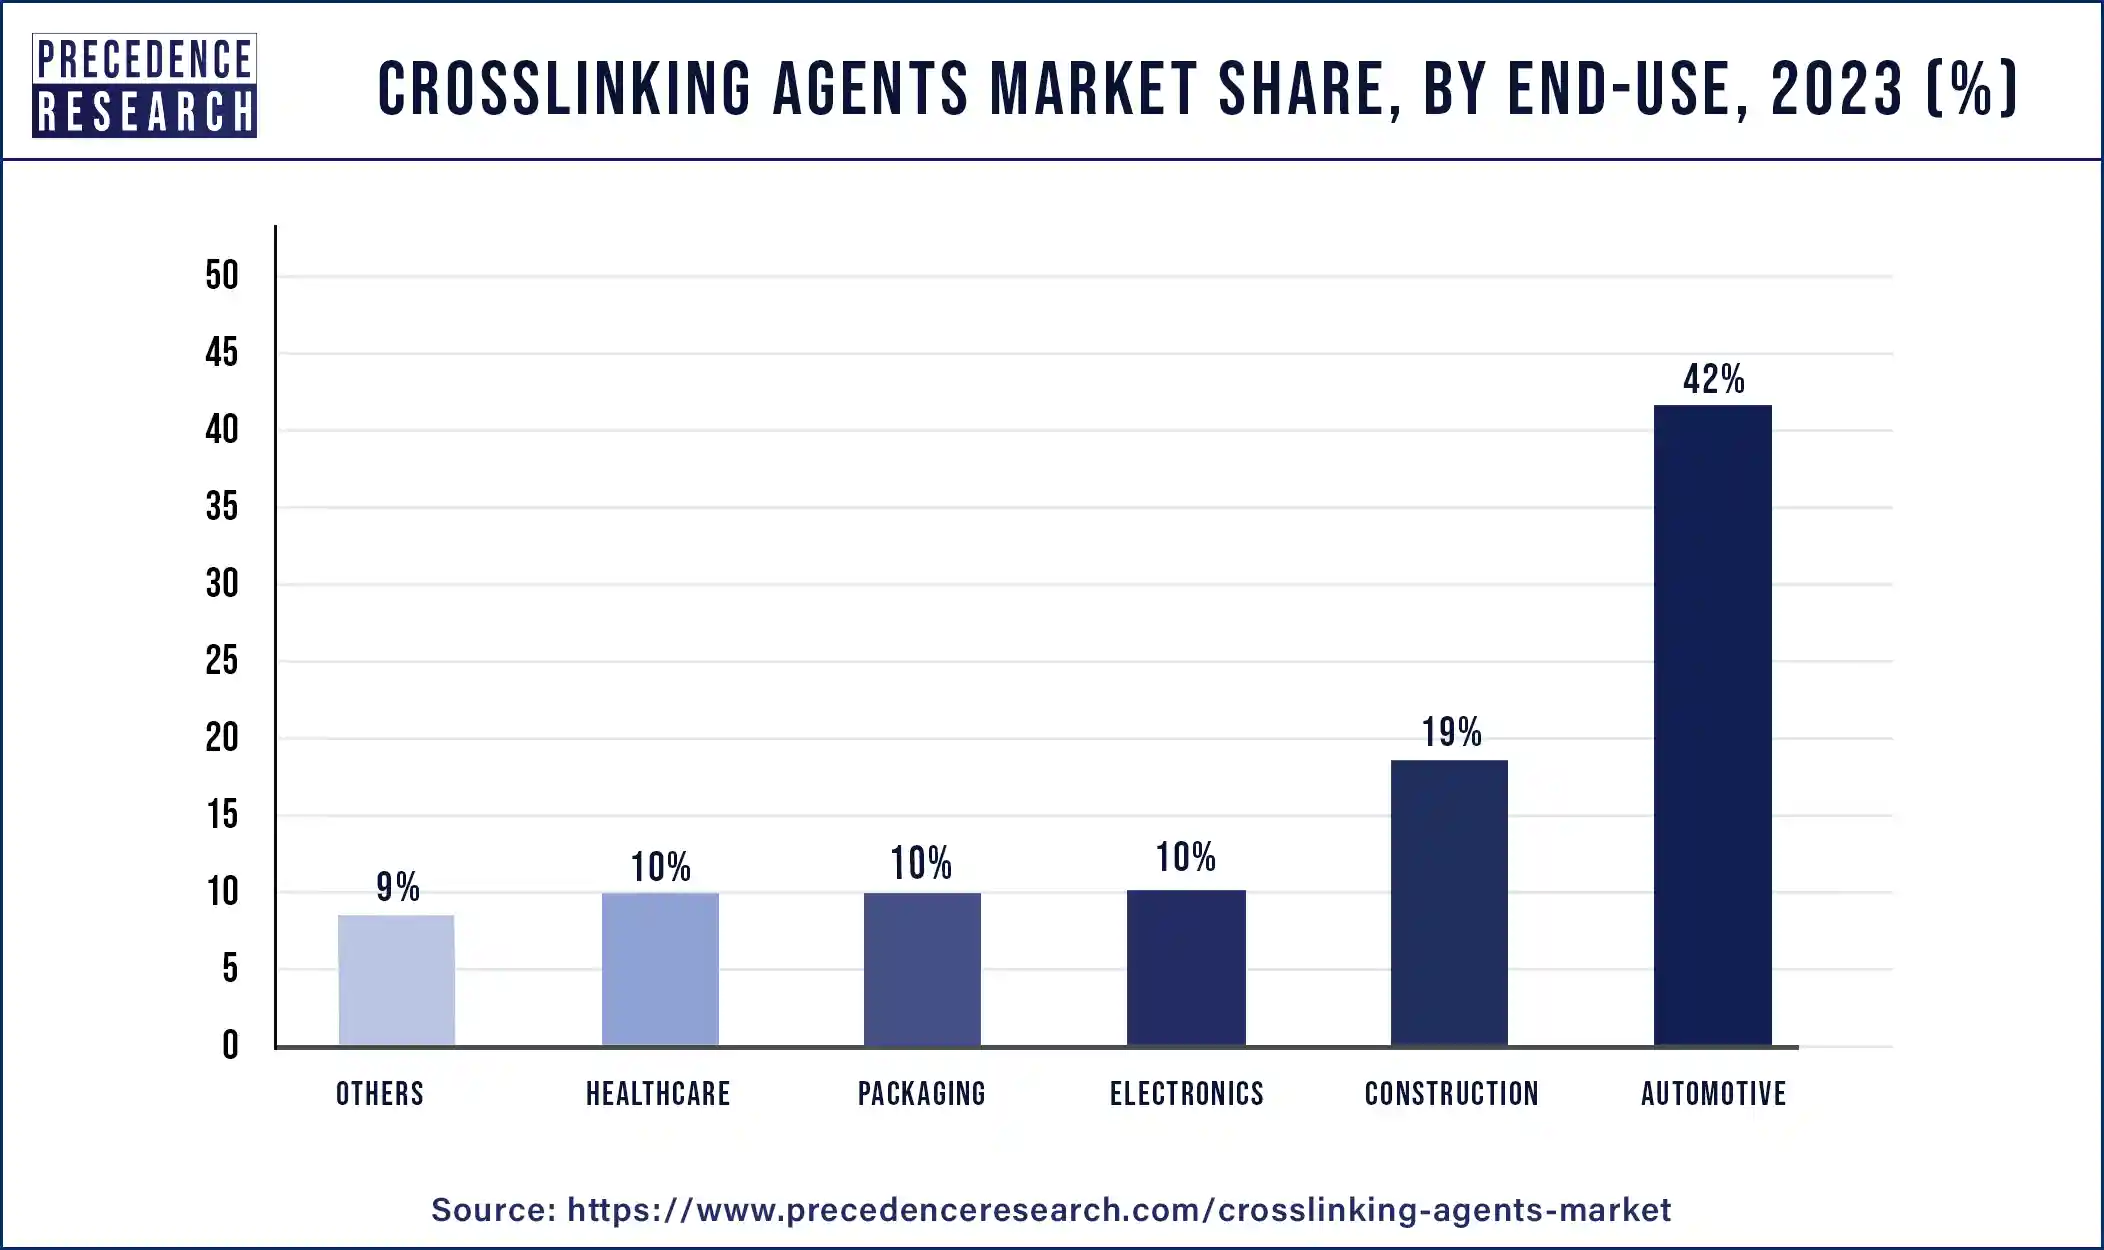 Crosslinking Agents Market Share, By End-use, 2023 (%)